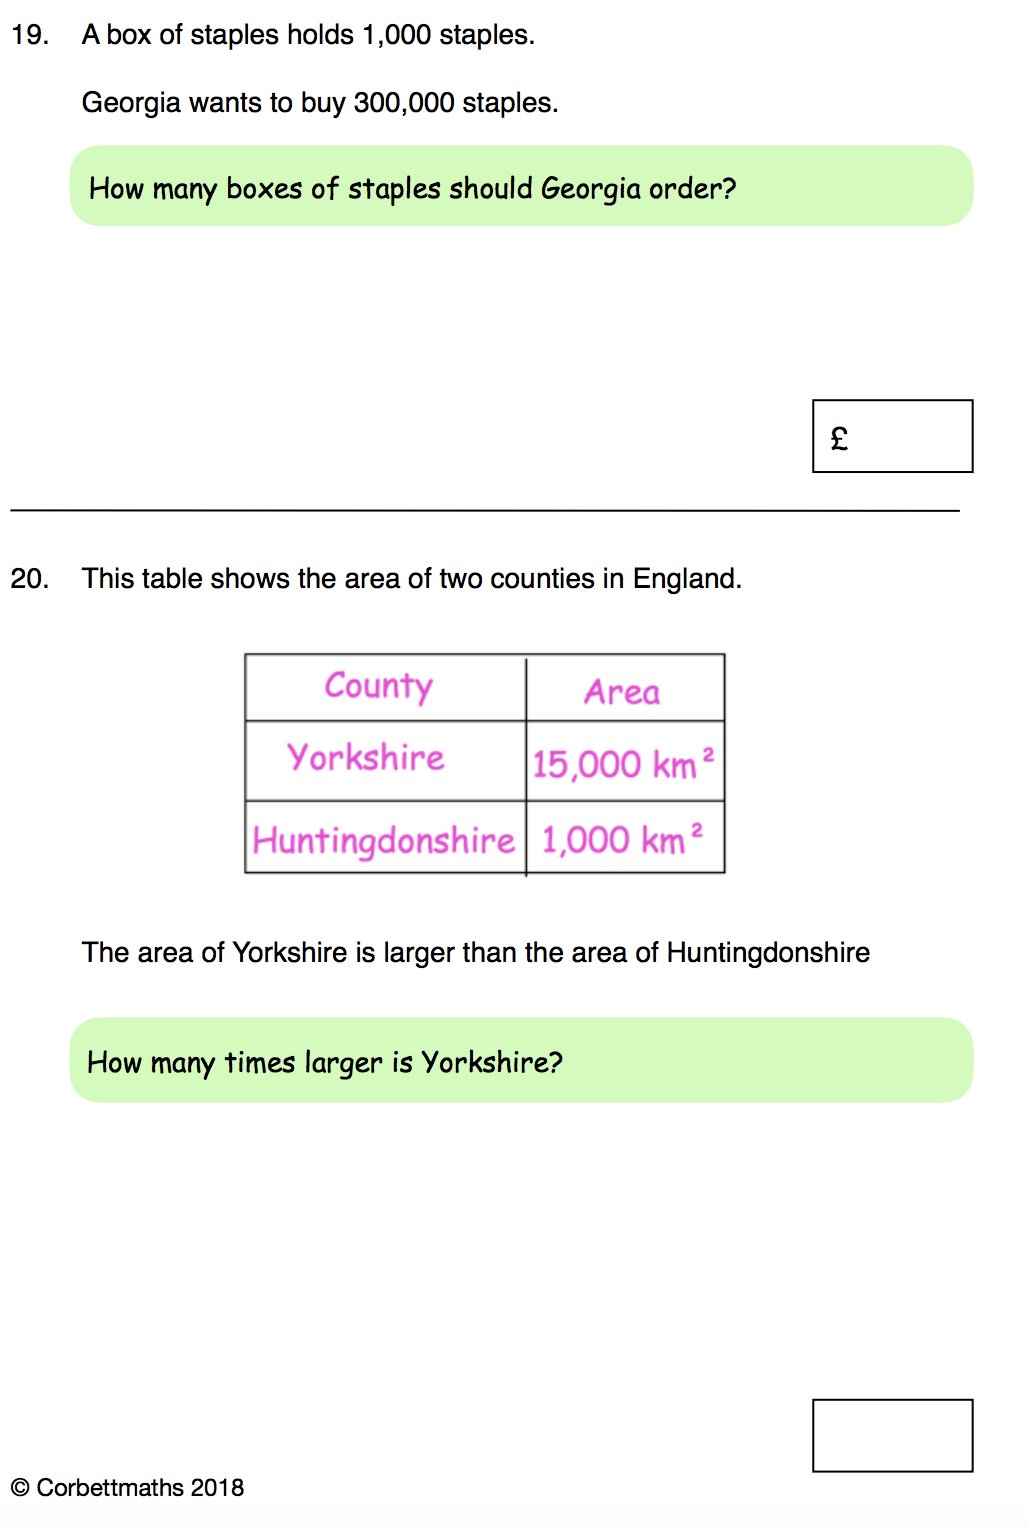 corbettmaths on twitter 3 new primary worksheets percentages of amounts proportion and multiplication division by 10 100 and 1000 https t co vbz4tsuiia https t co xhu2jo0n9w twitter